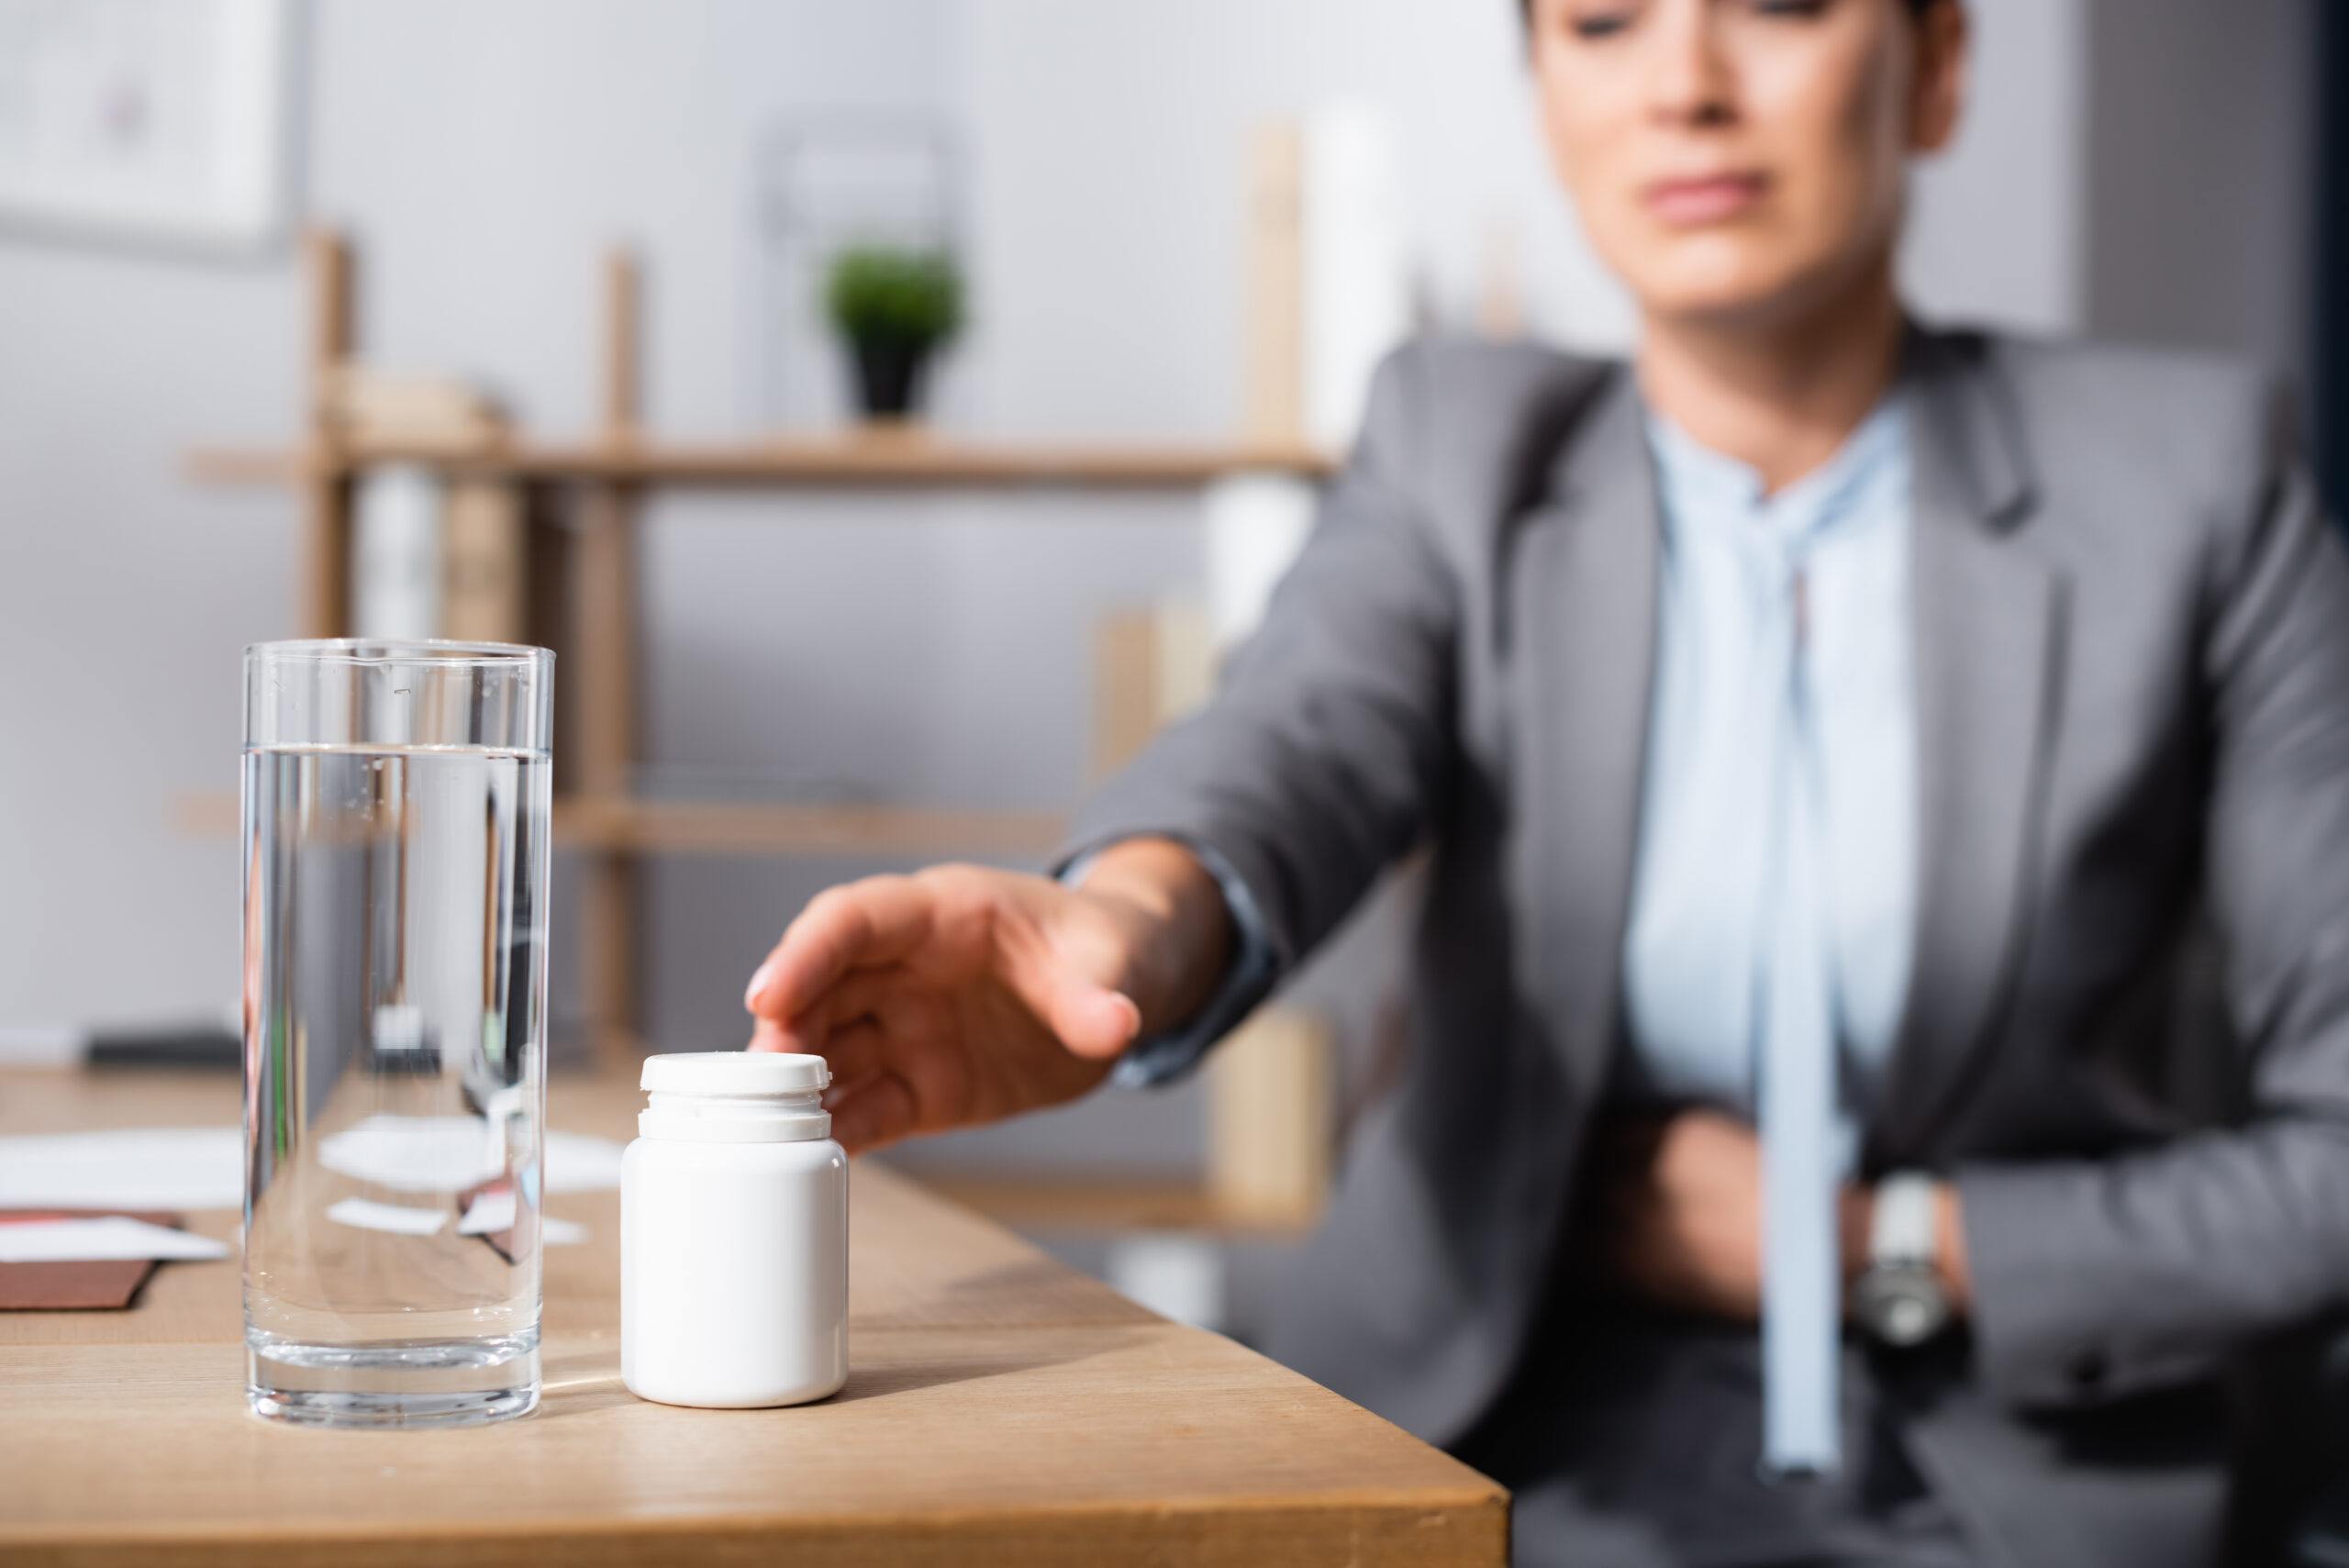 Image of a person at work reaching for a glass of water and a bottle of pills.